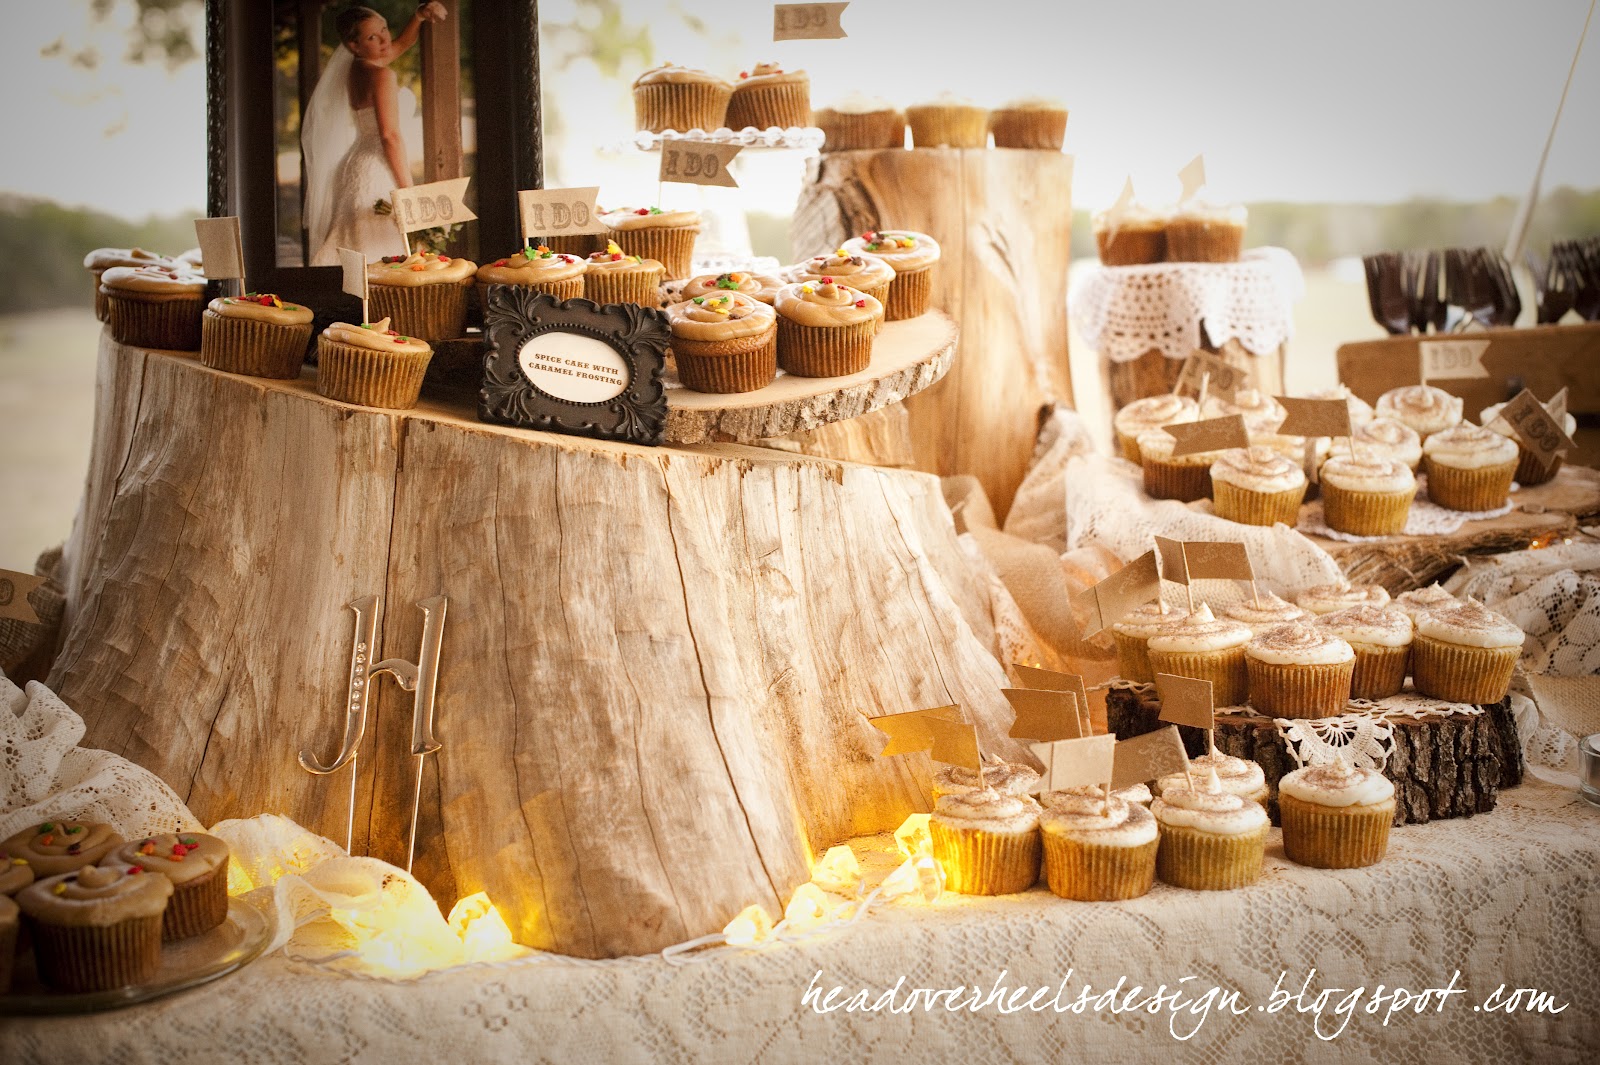 Stands made from wooden stumps